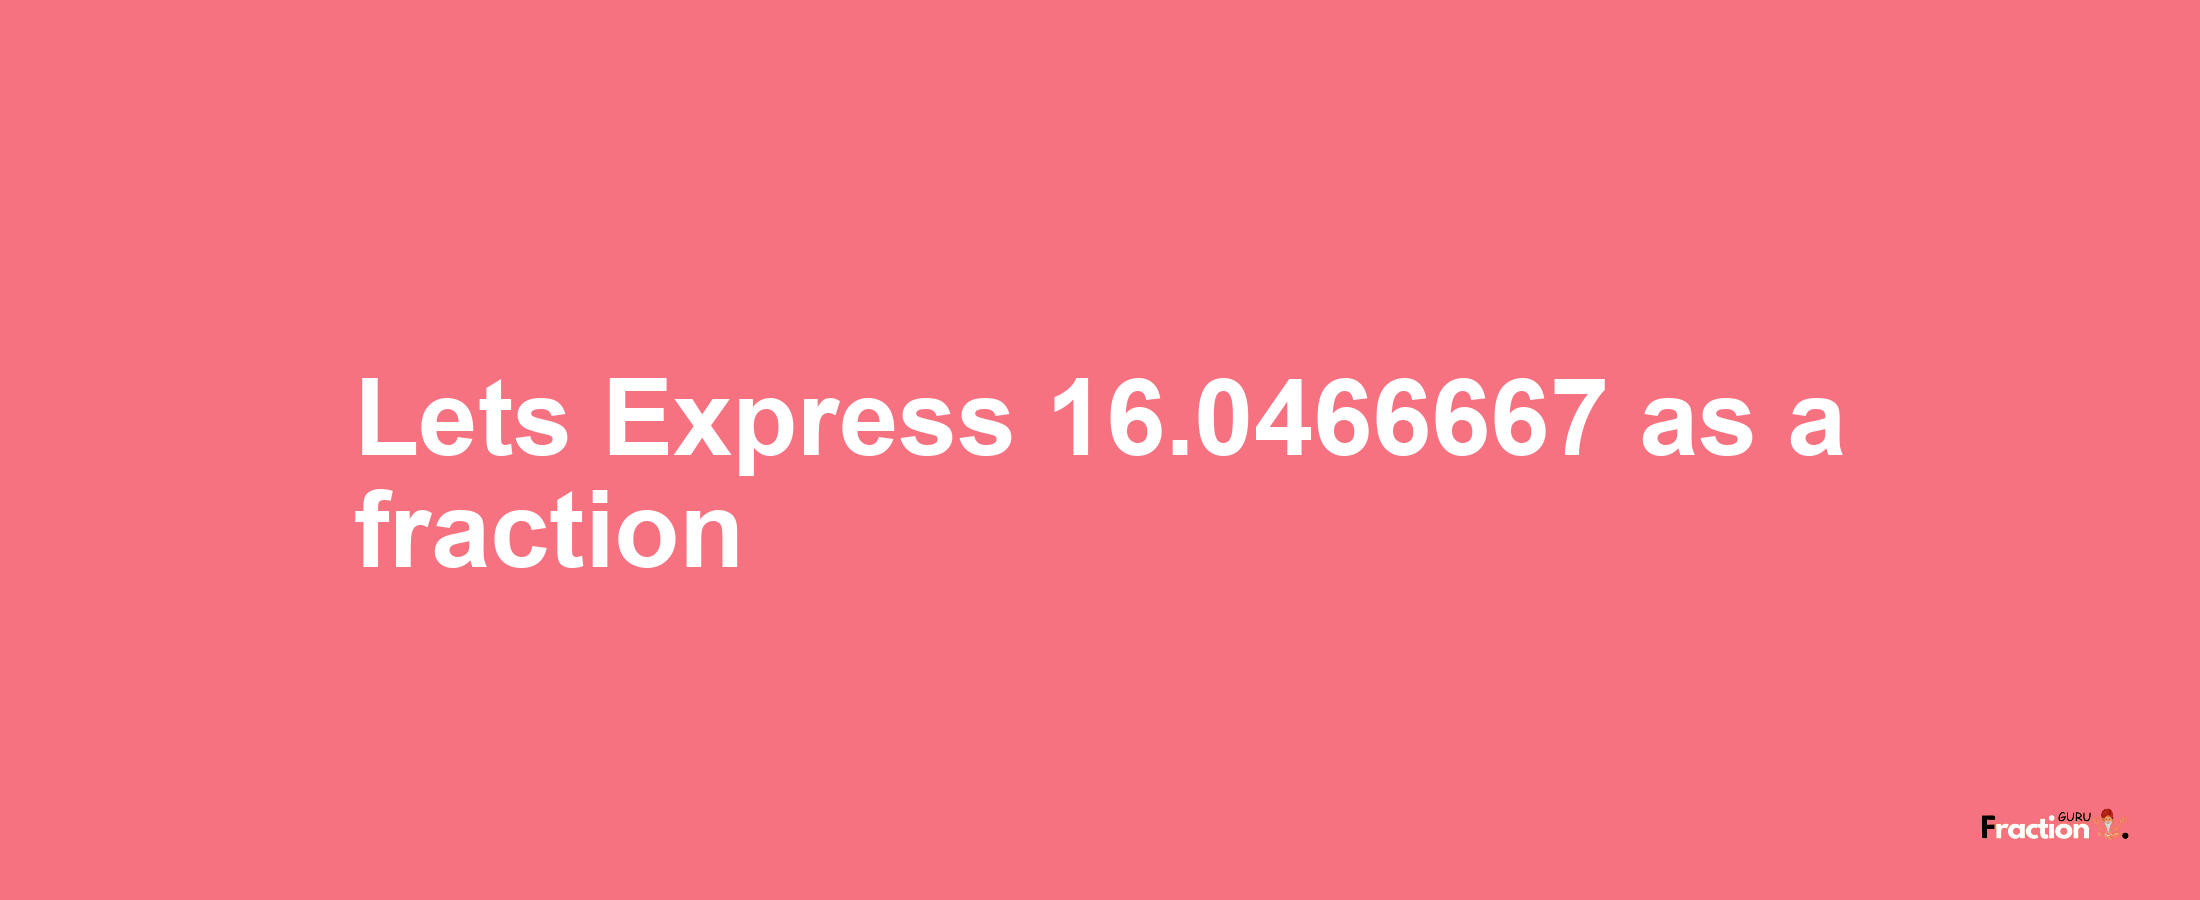 Lets Express 16.0466667 as afraction